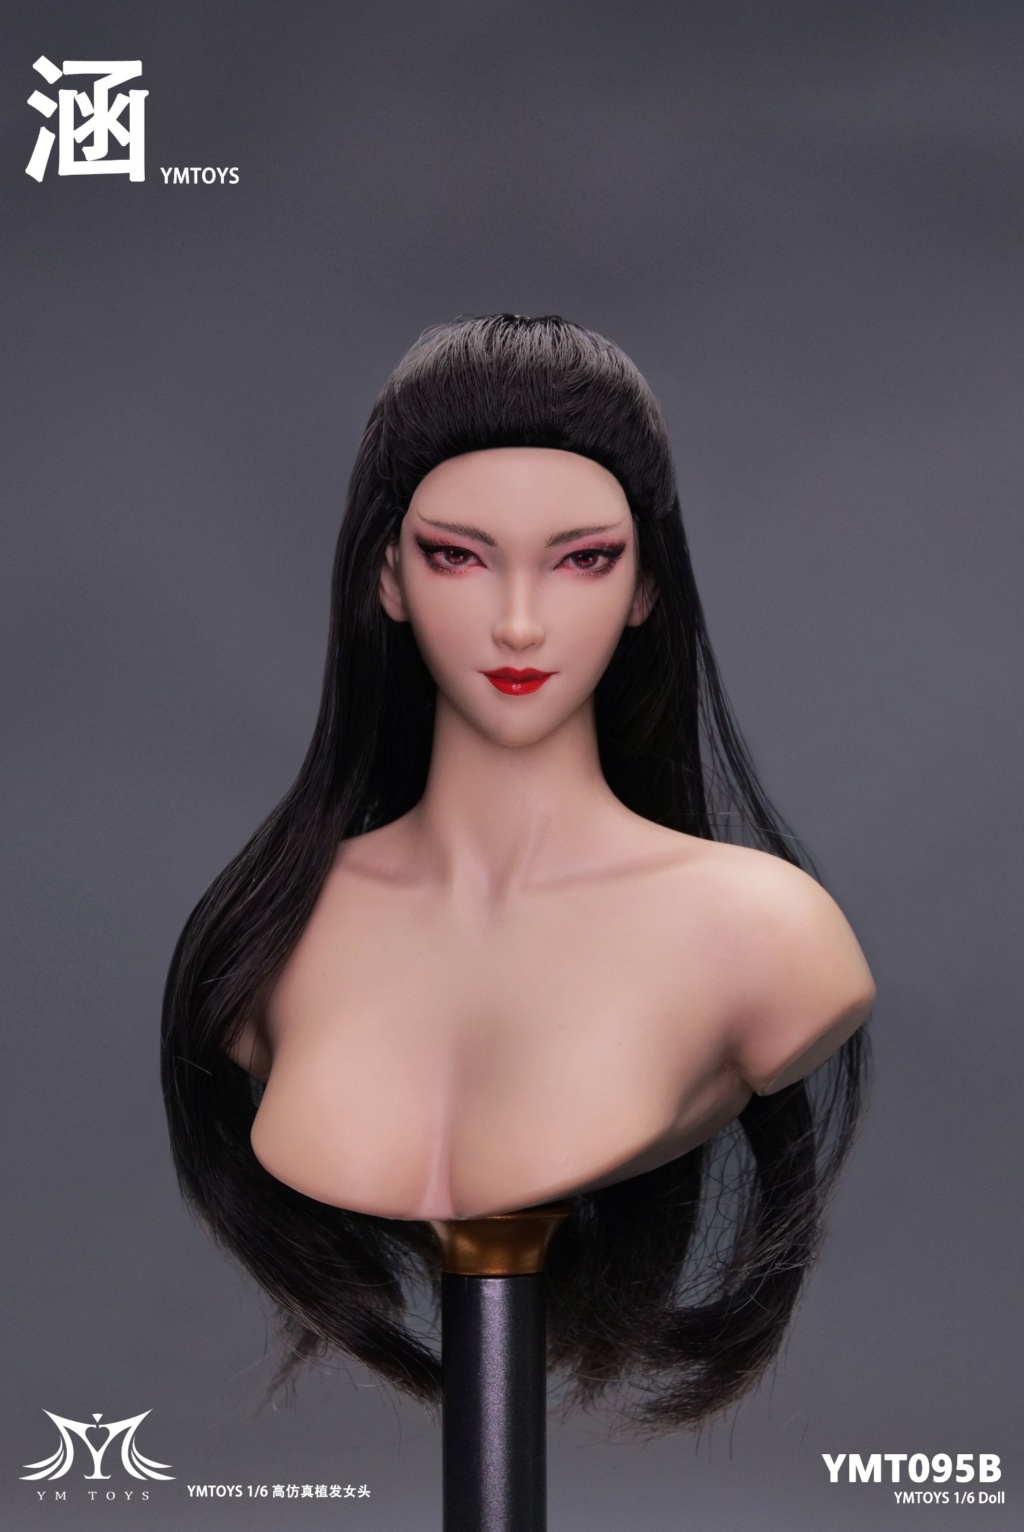 Female - NEW PRODUCT: YMToys: 1/6 hair transplant female head carving Han (YMT095) ​​King (YMT096) 14293610